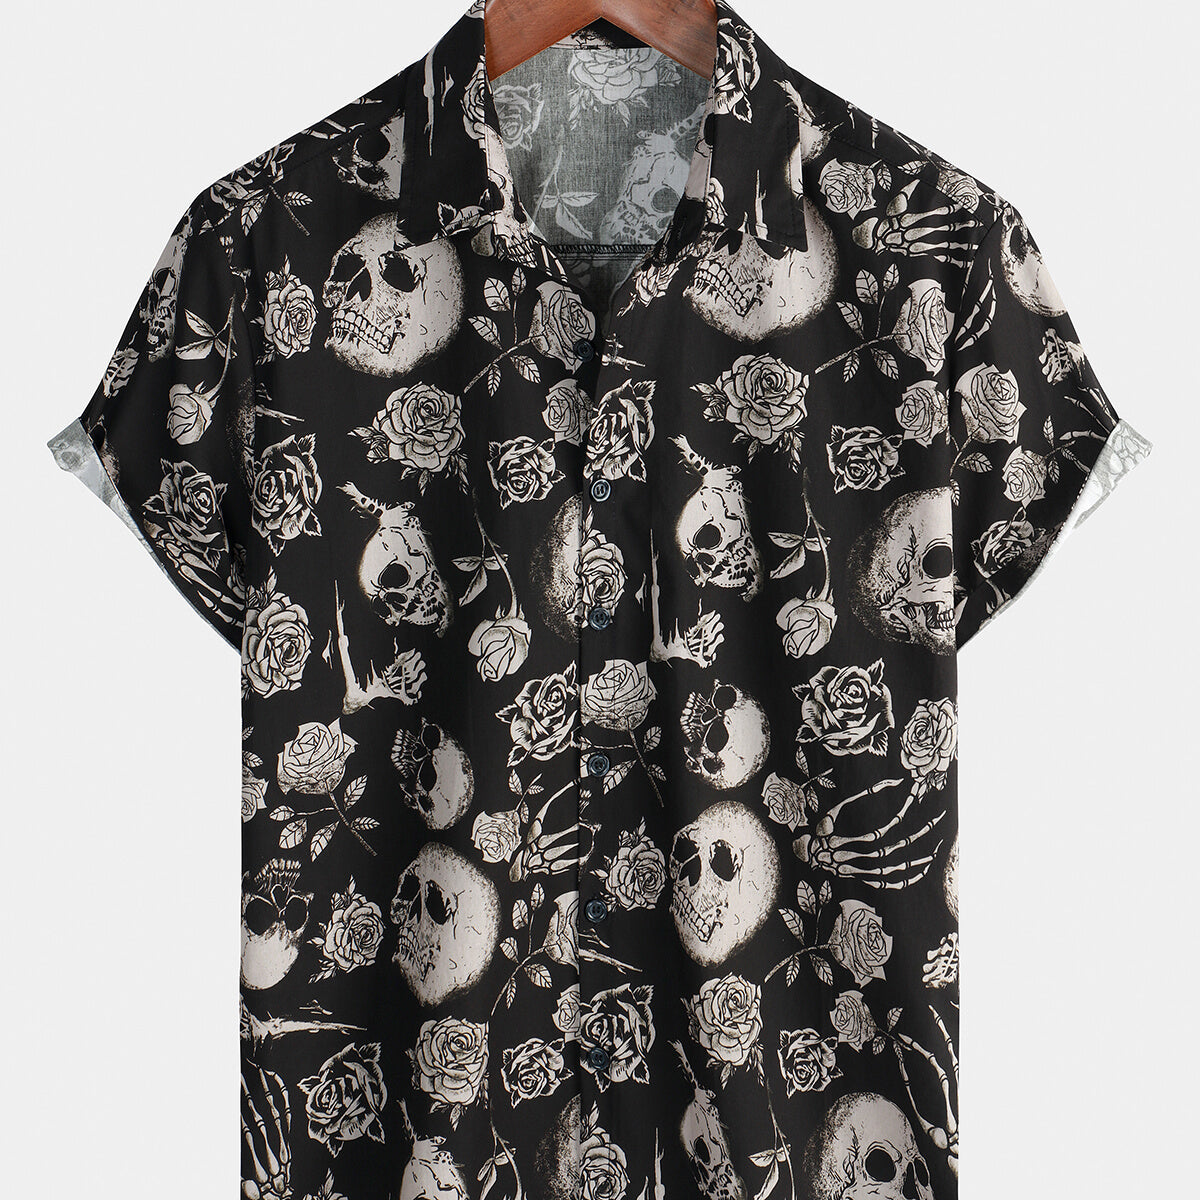 Chemise boutonnée Cool Skull Rose Floral Punk Rock and Roll pour hommes